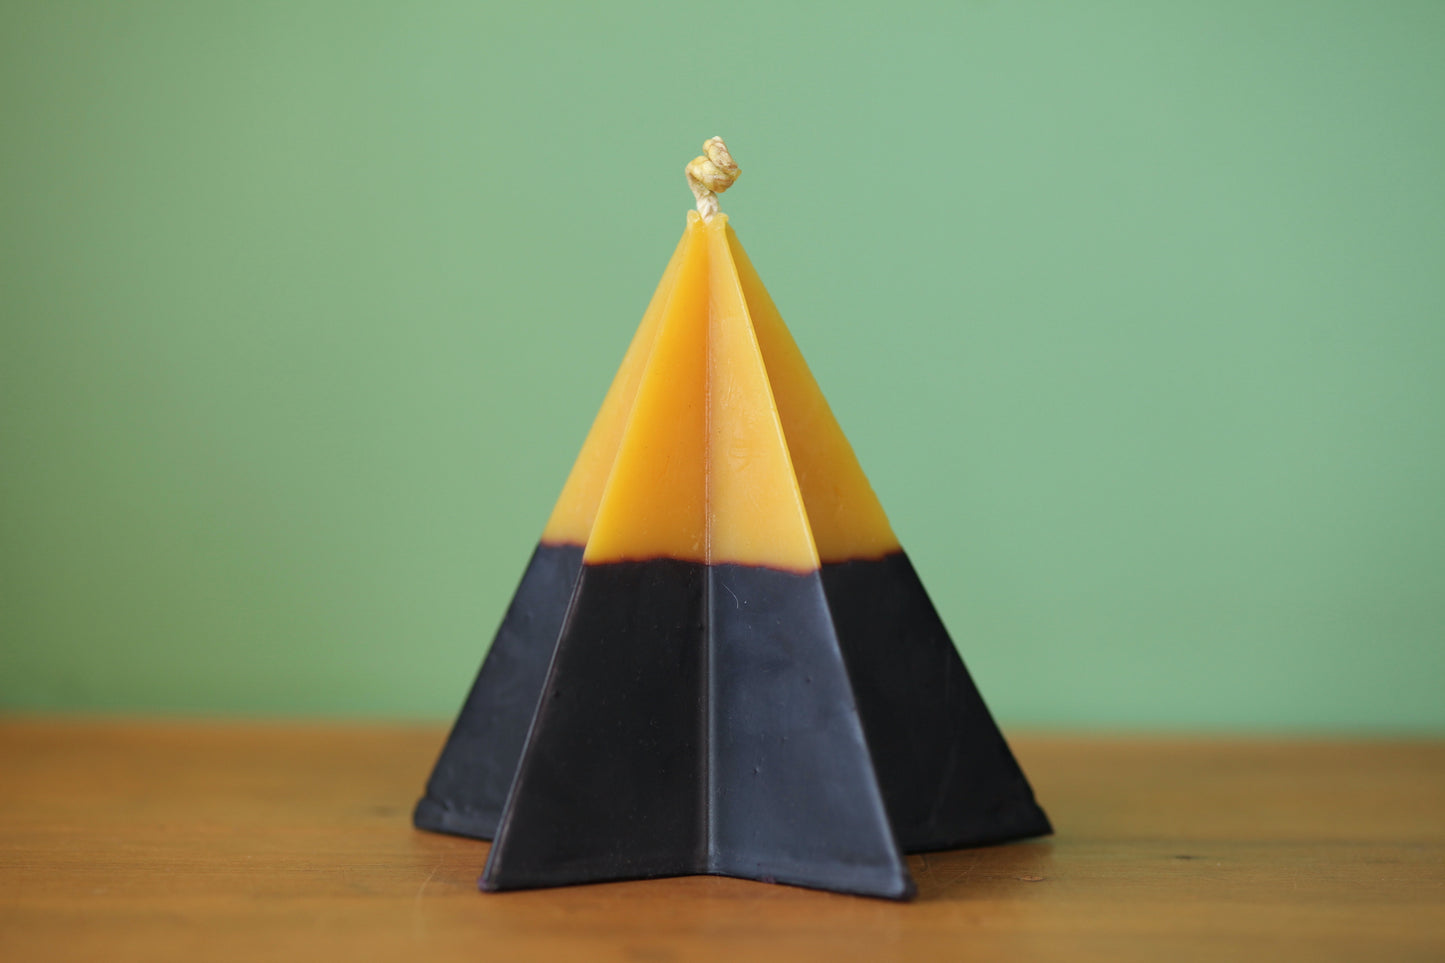 Star Pyramid Candle by Hohepa